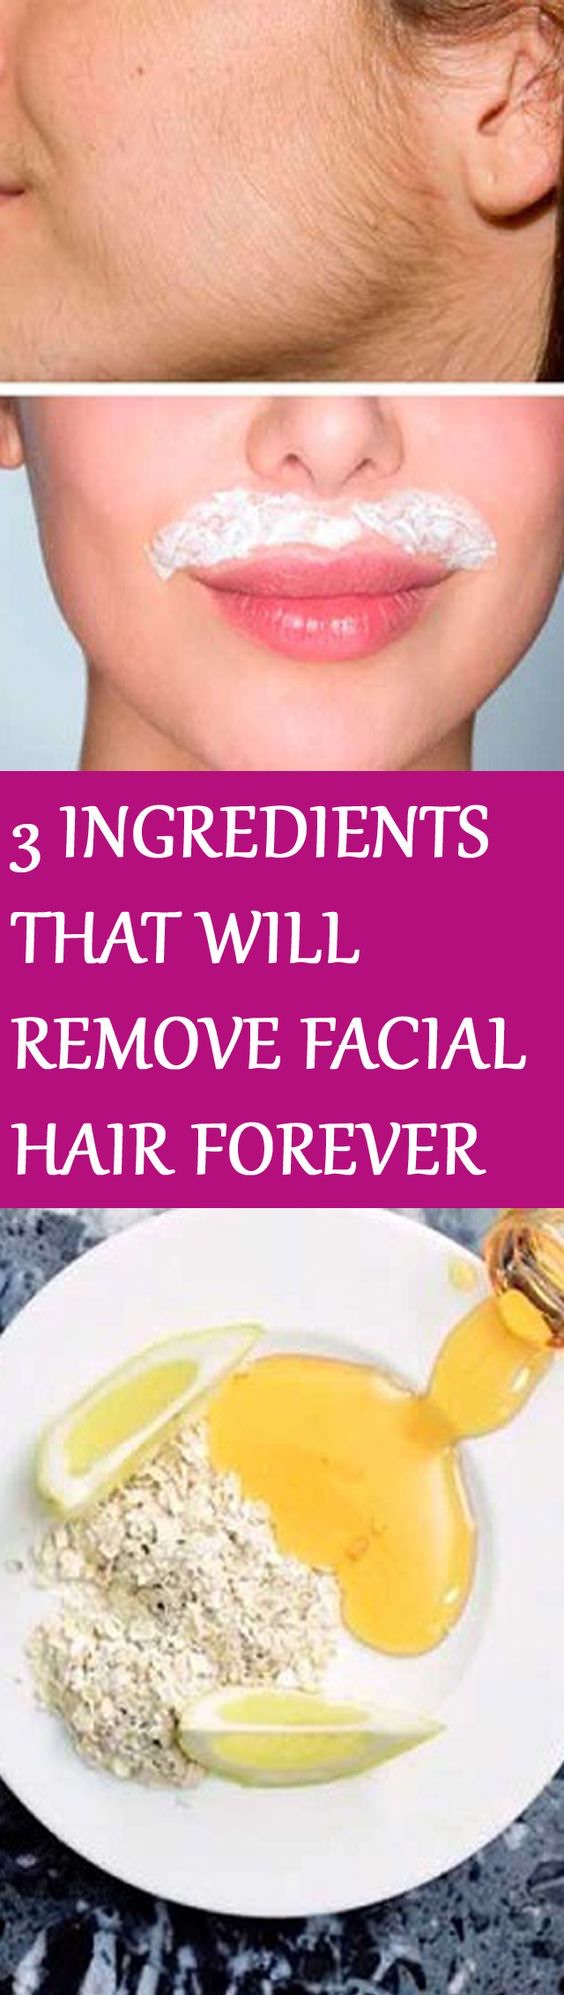 In just 15 minutes these 3 ingredients will remove facial hair forever